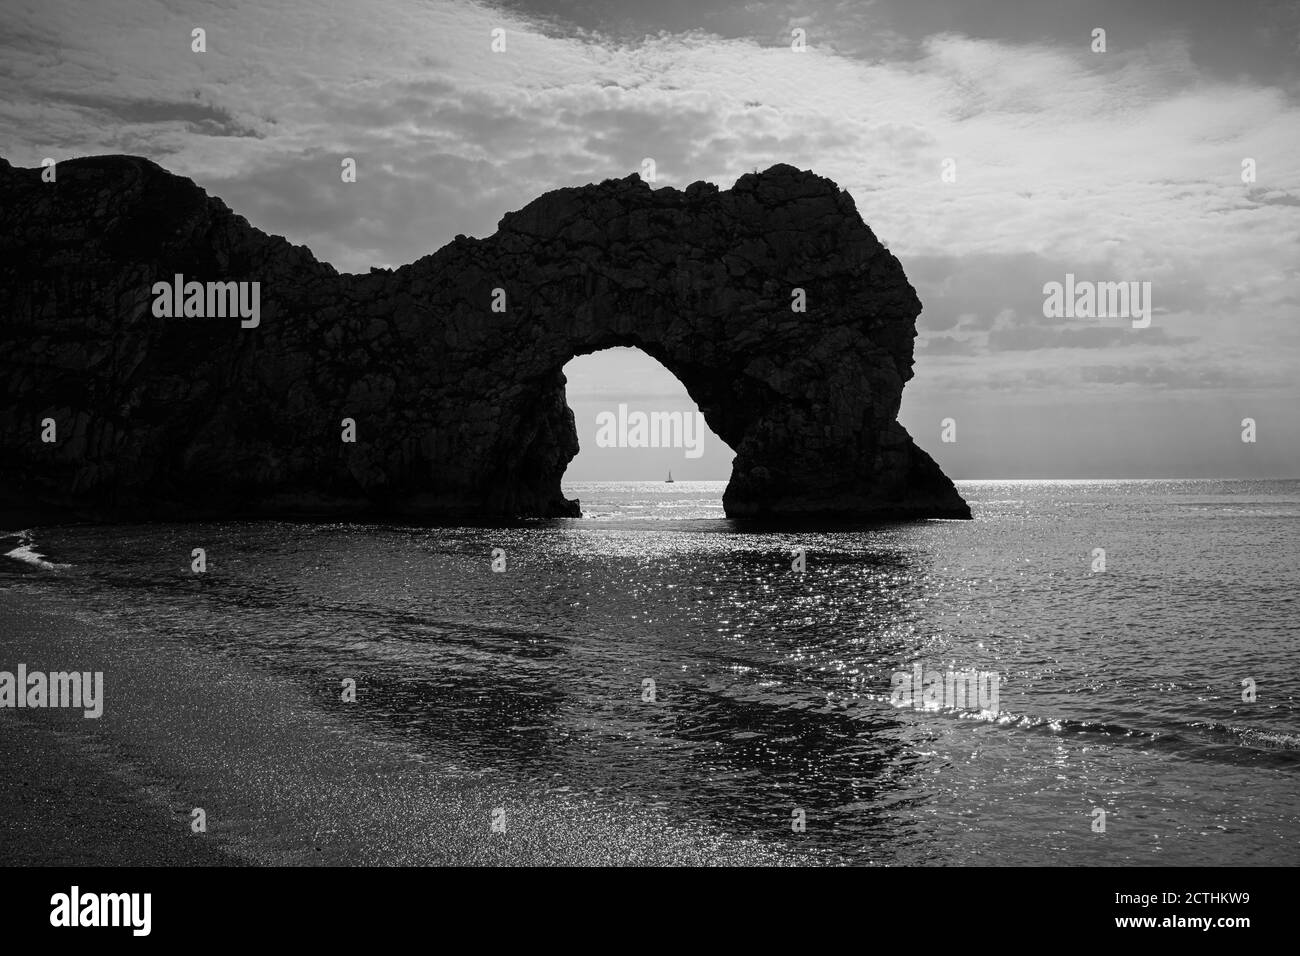 Late afternoon silhouetted view of the picturesque Durdle Door rock formation on the Jurassic Coast World Heritage site in Dorset, south-west England Stock Photo